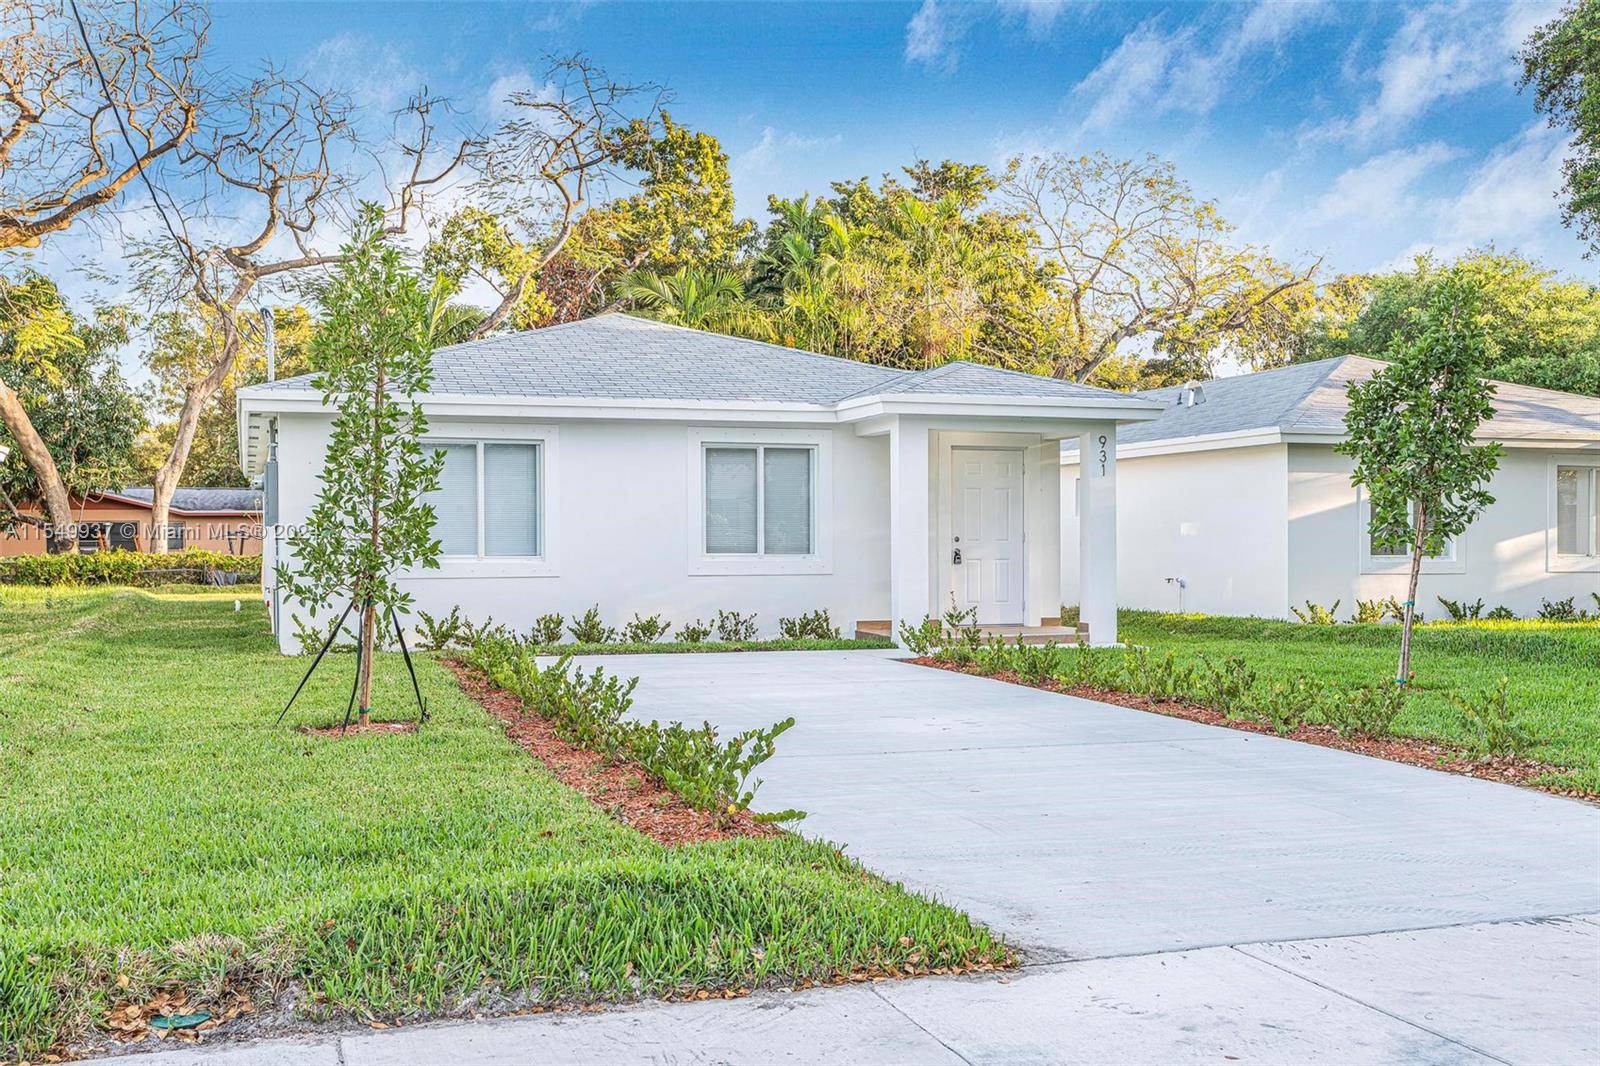 Brand New 4Bed 2Bath Single Family Home in the Heart of Miami.